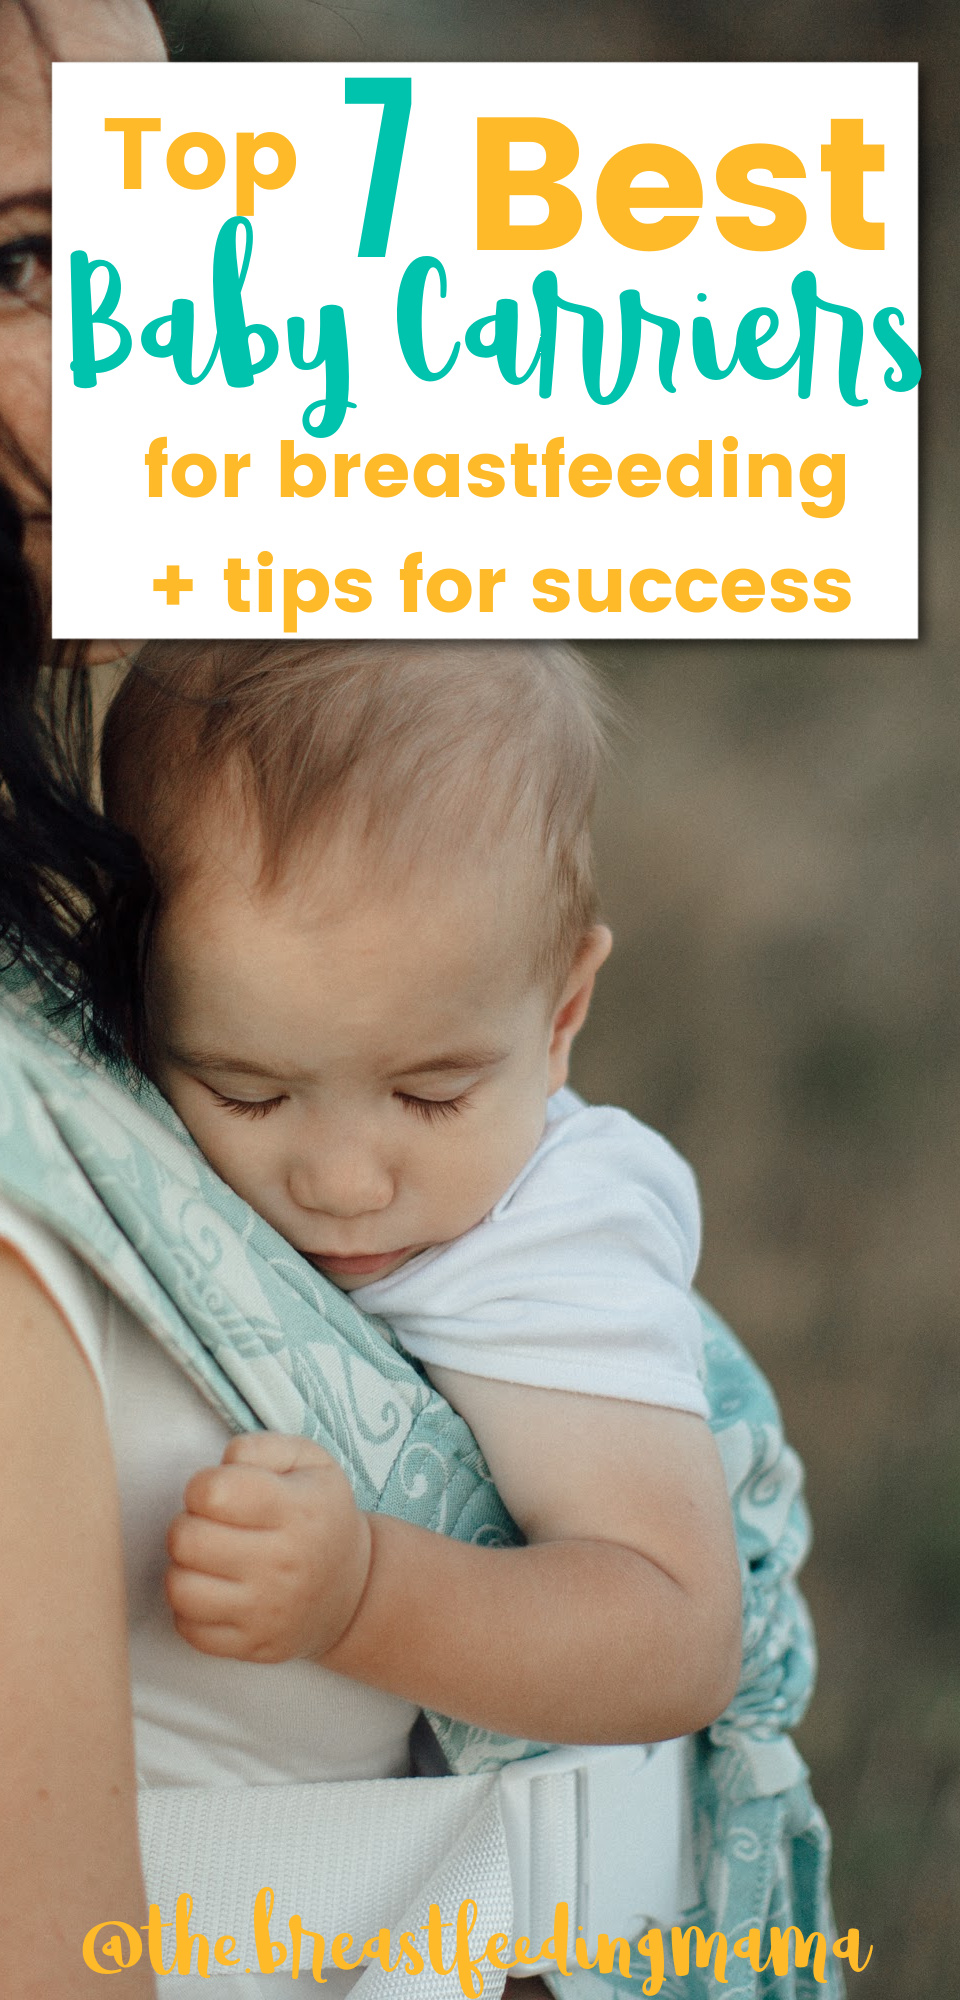 As a breastfeeding mama you know that when you have a hungry baby you need to feed them anytime and anywhere. And that might mean while you are out and about. There are many types of baby carriers- but not all are good for nursing moms. In this post, we'll share our favorite breastfeeding-friendly baby carriers, along with some tips for babywearing!